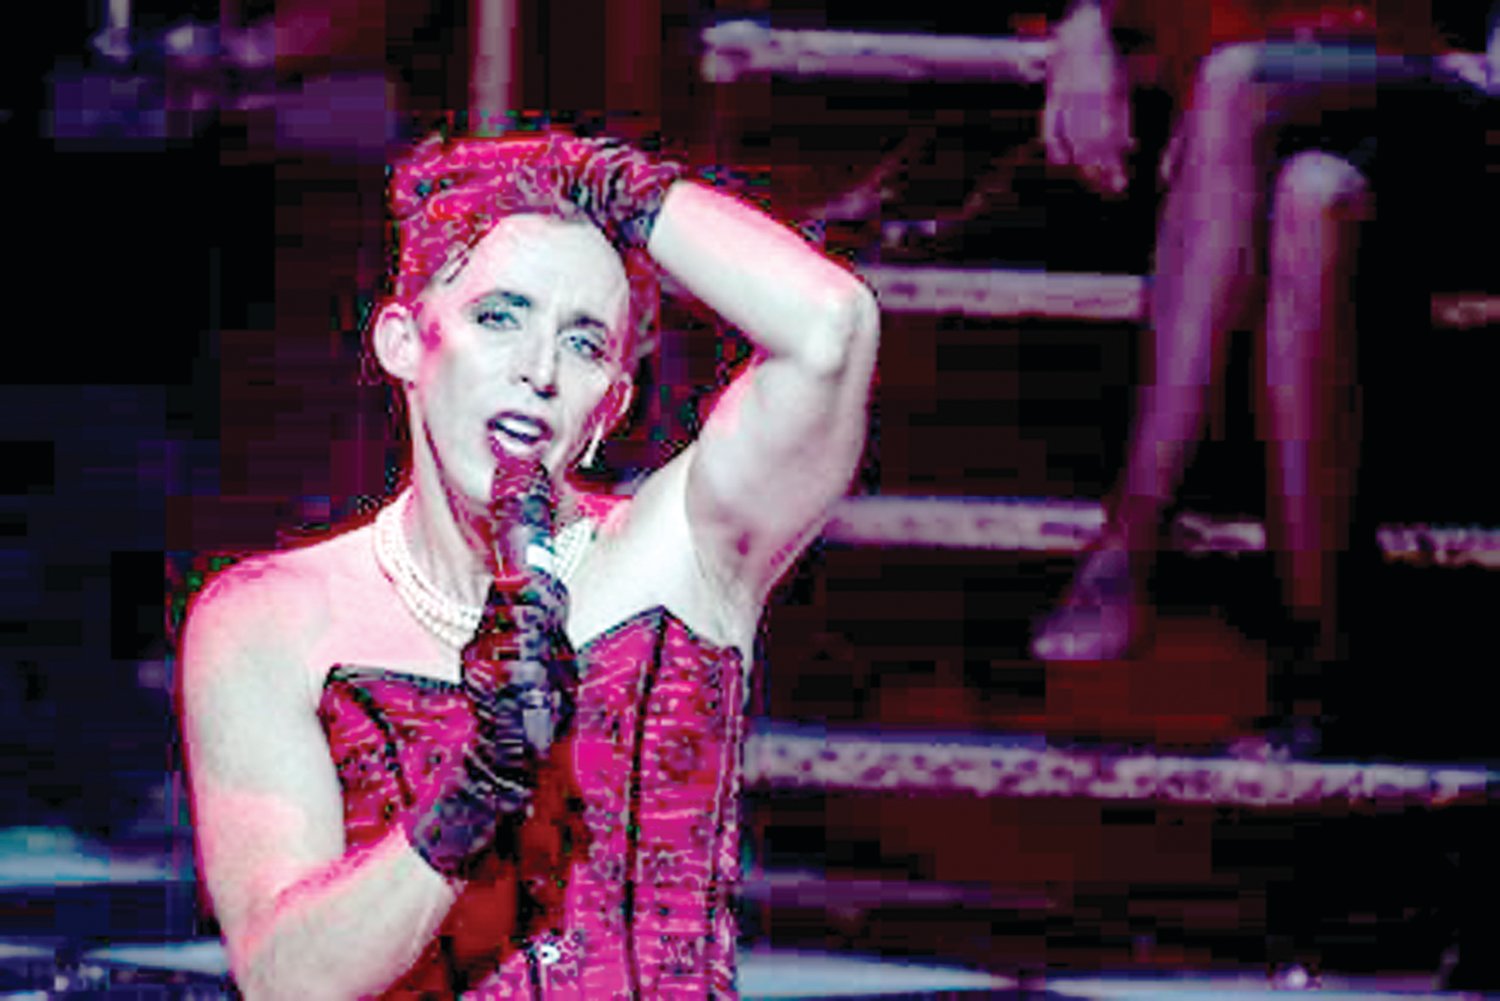 Kevin Cahoon as Dr. Frank N. Furter in Richard O’Brien’s “The Rocky Horror Show” at Bucks County Playhouse. Photograph by Dan Gramkee.